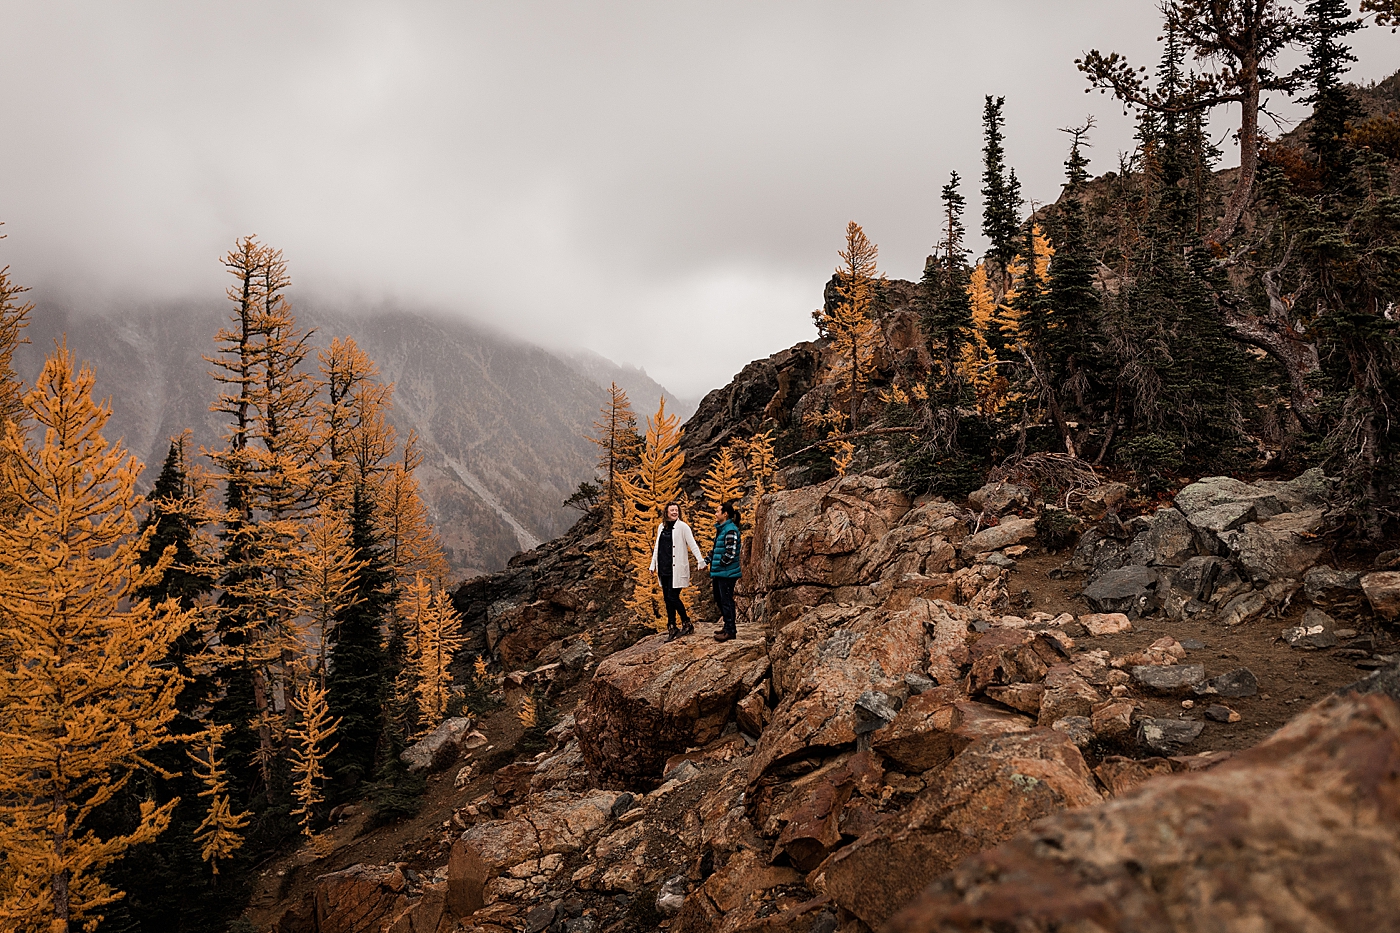 Engagement session in the golden larches of the PNW. Photo by Megan Montalvo Photography.